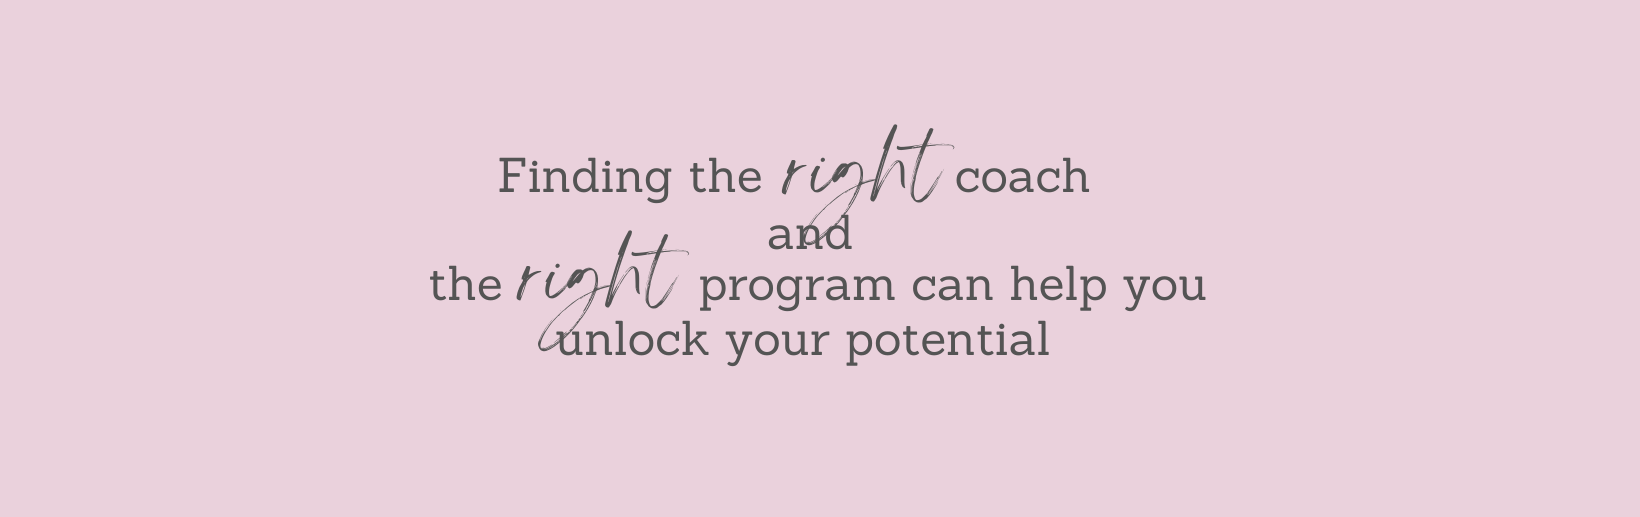 Find the right coach-1